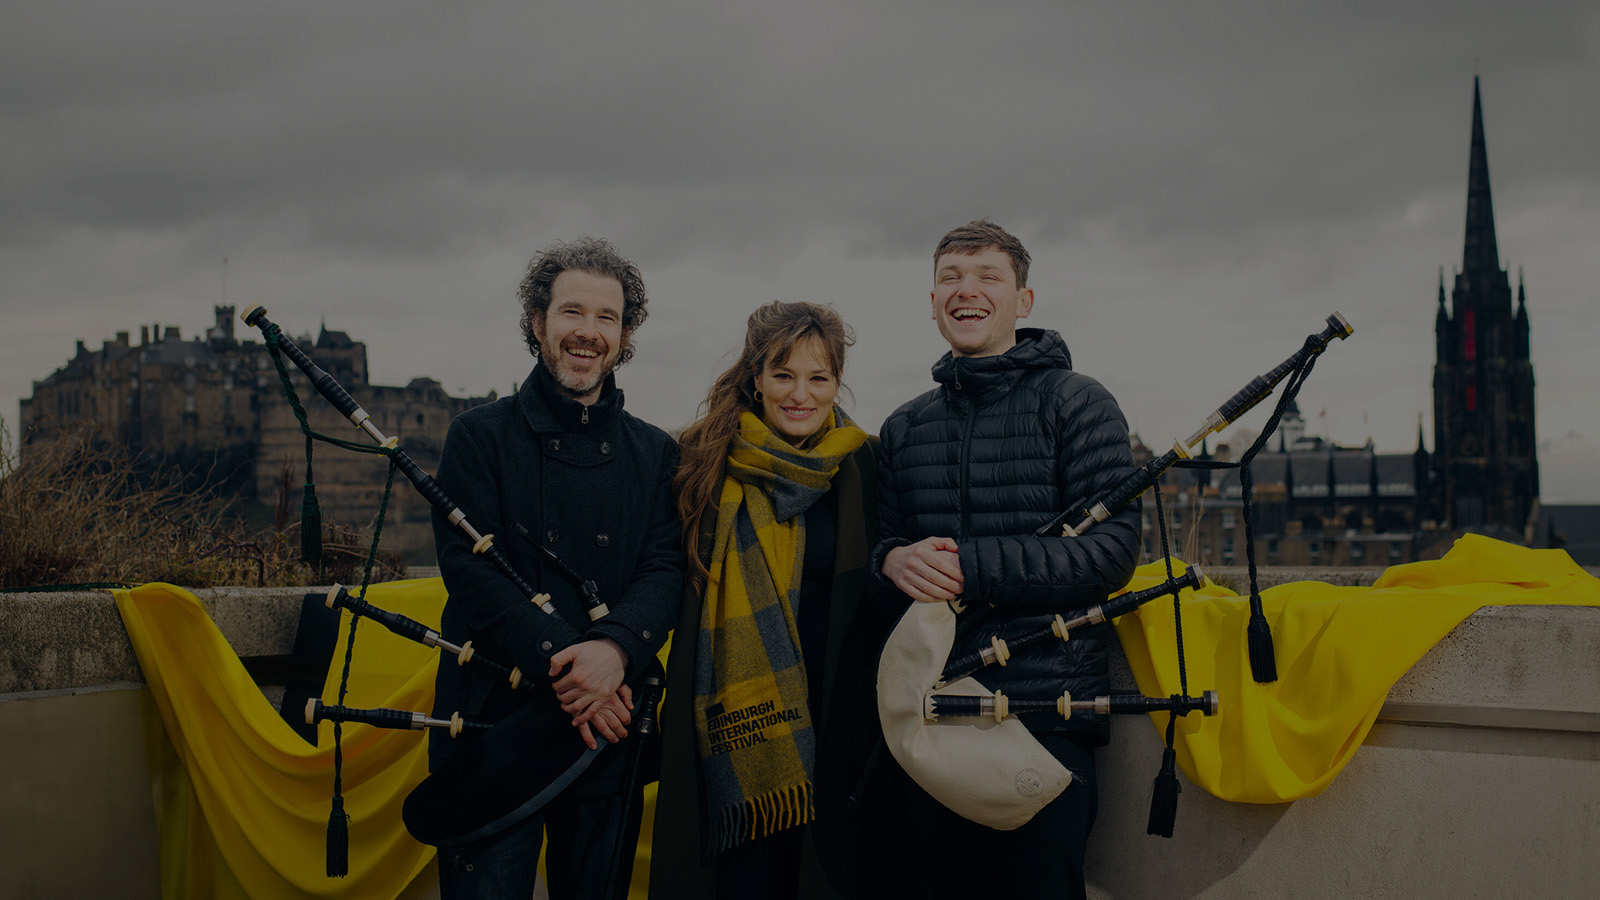 Three people (a young man, an older man, both holding bagpipes,, and a woman) pictured outside with Edinburgh castle in the background. They are musicians Calum MacCrimmon and Conal McDonagh from Breabach and Nicola Benedetti